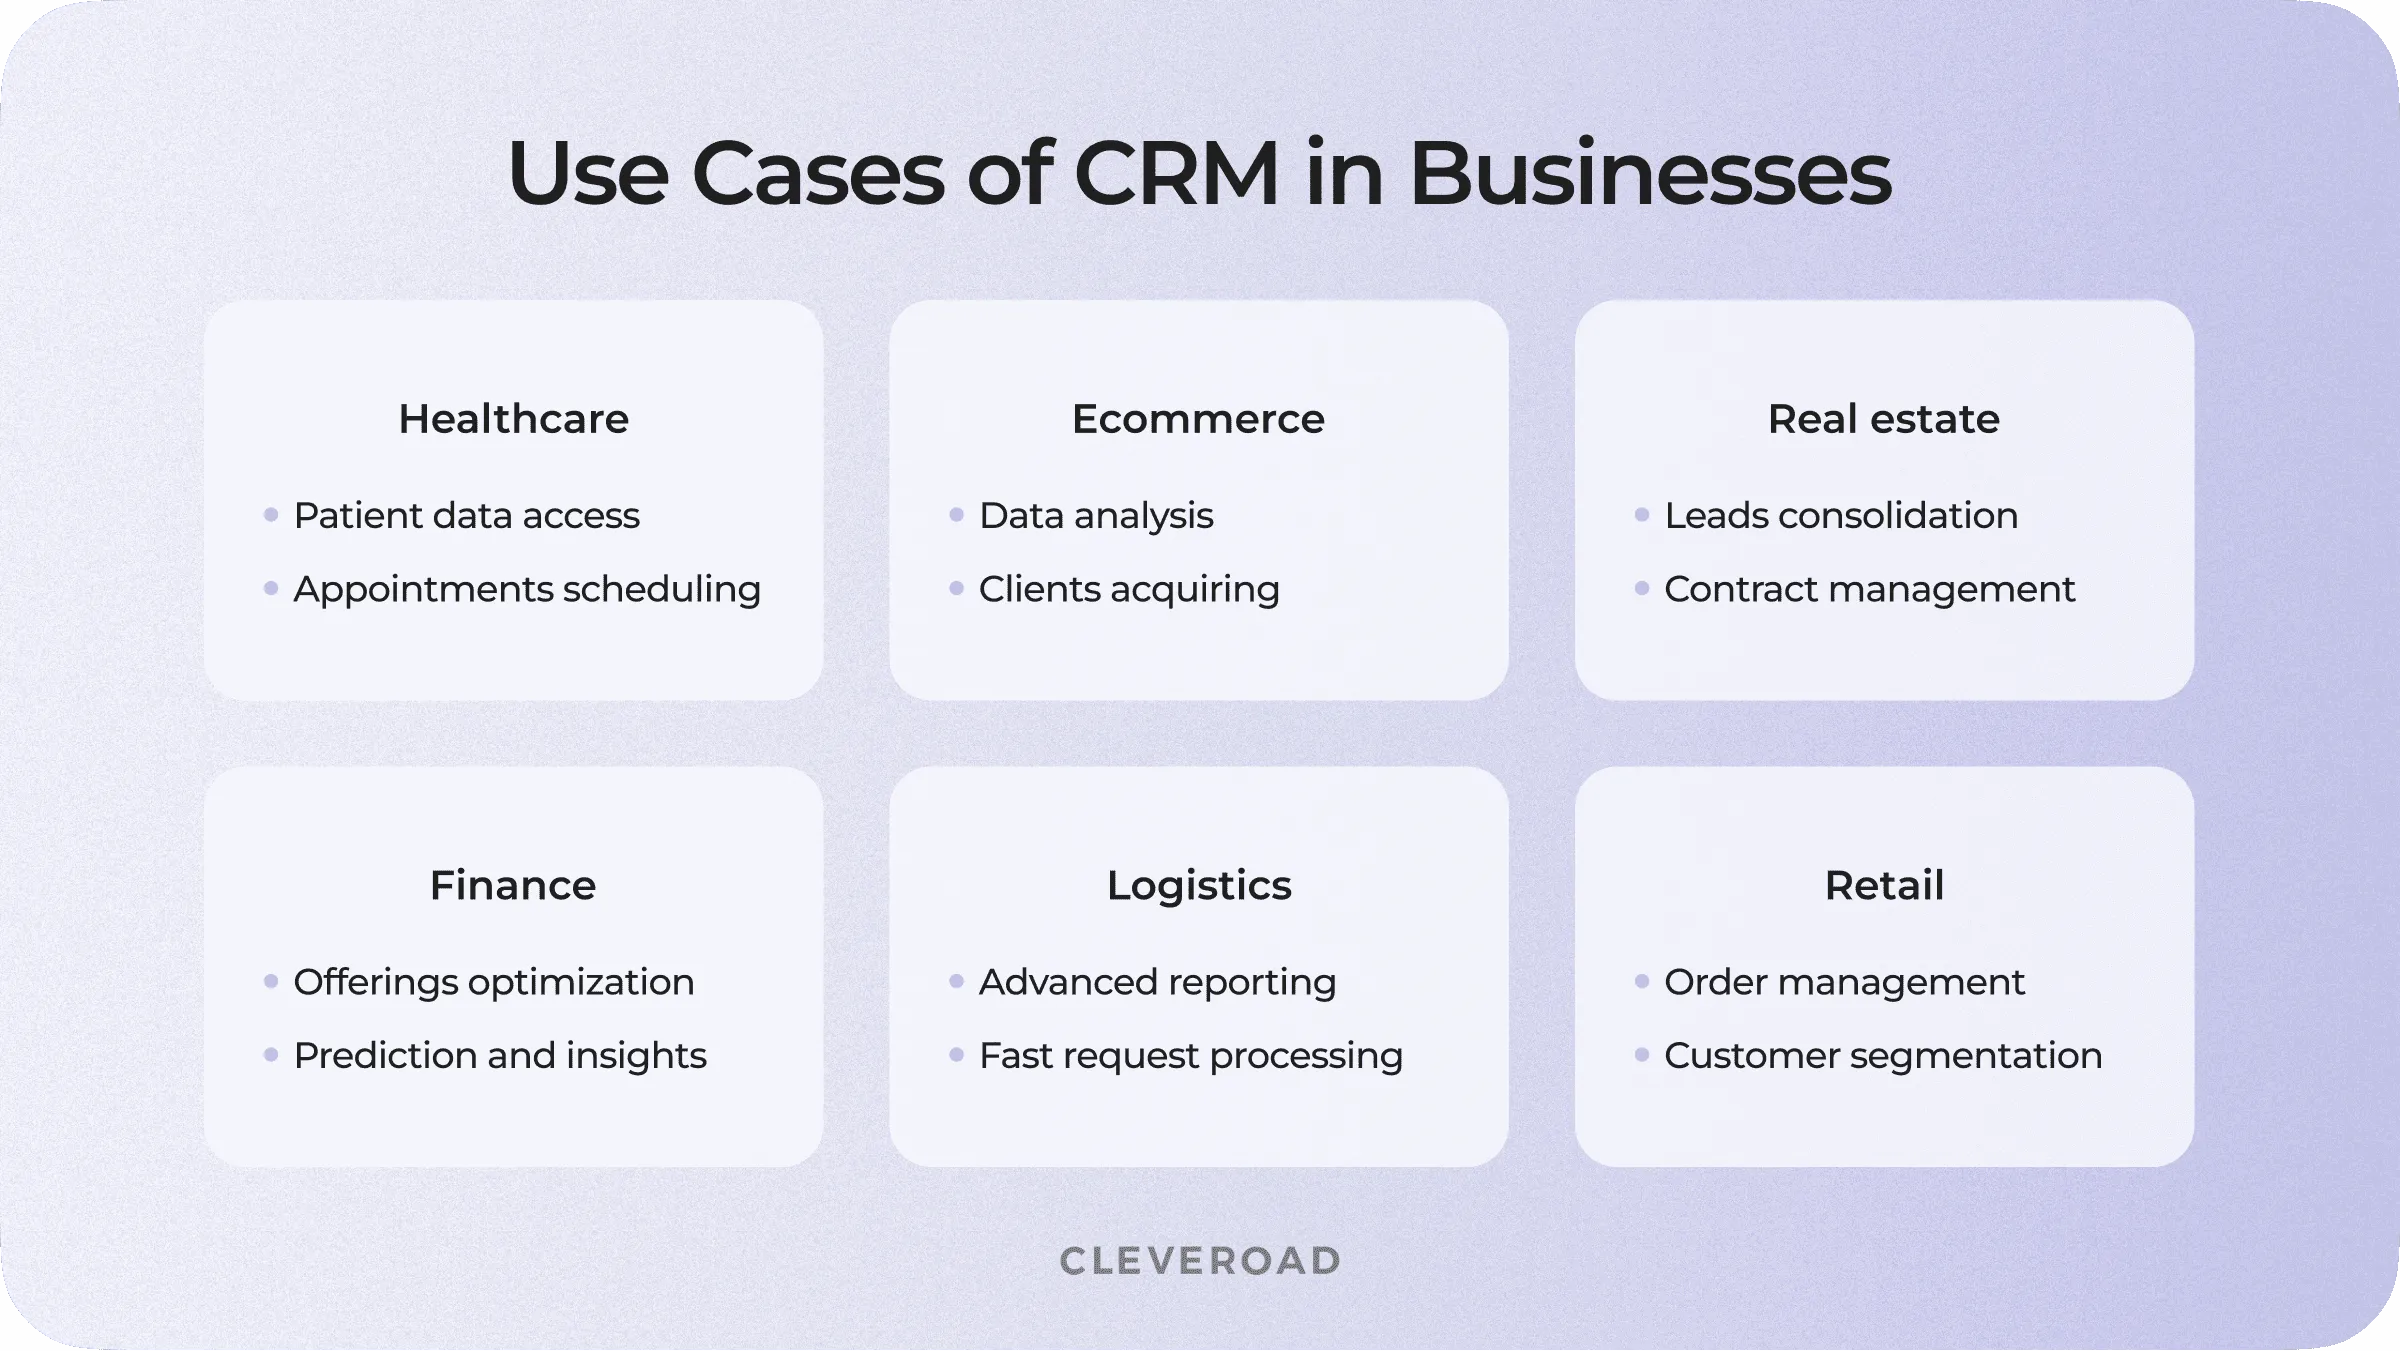 Use cases of CRM in businesses